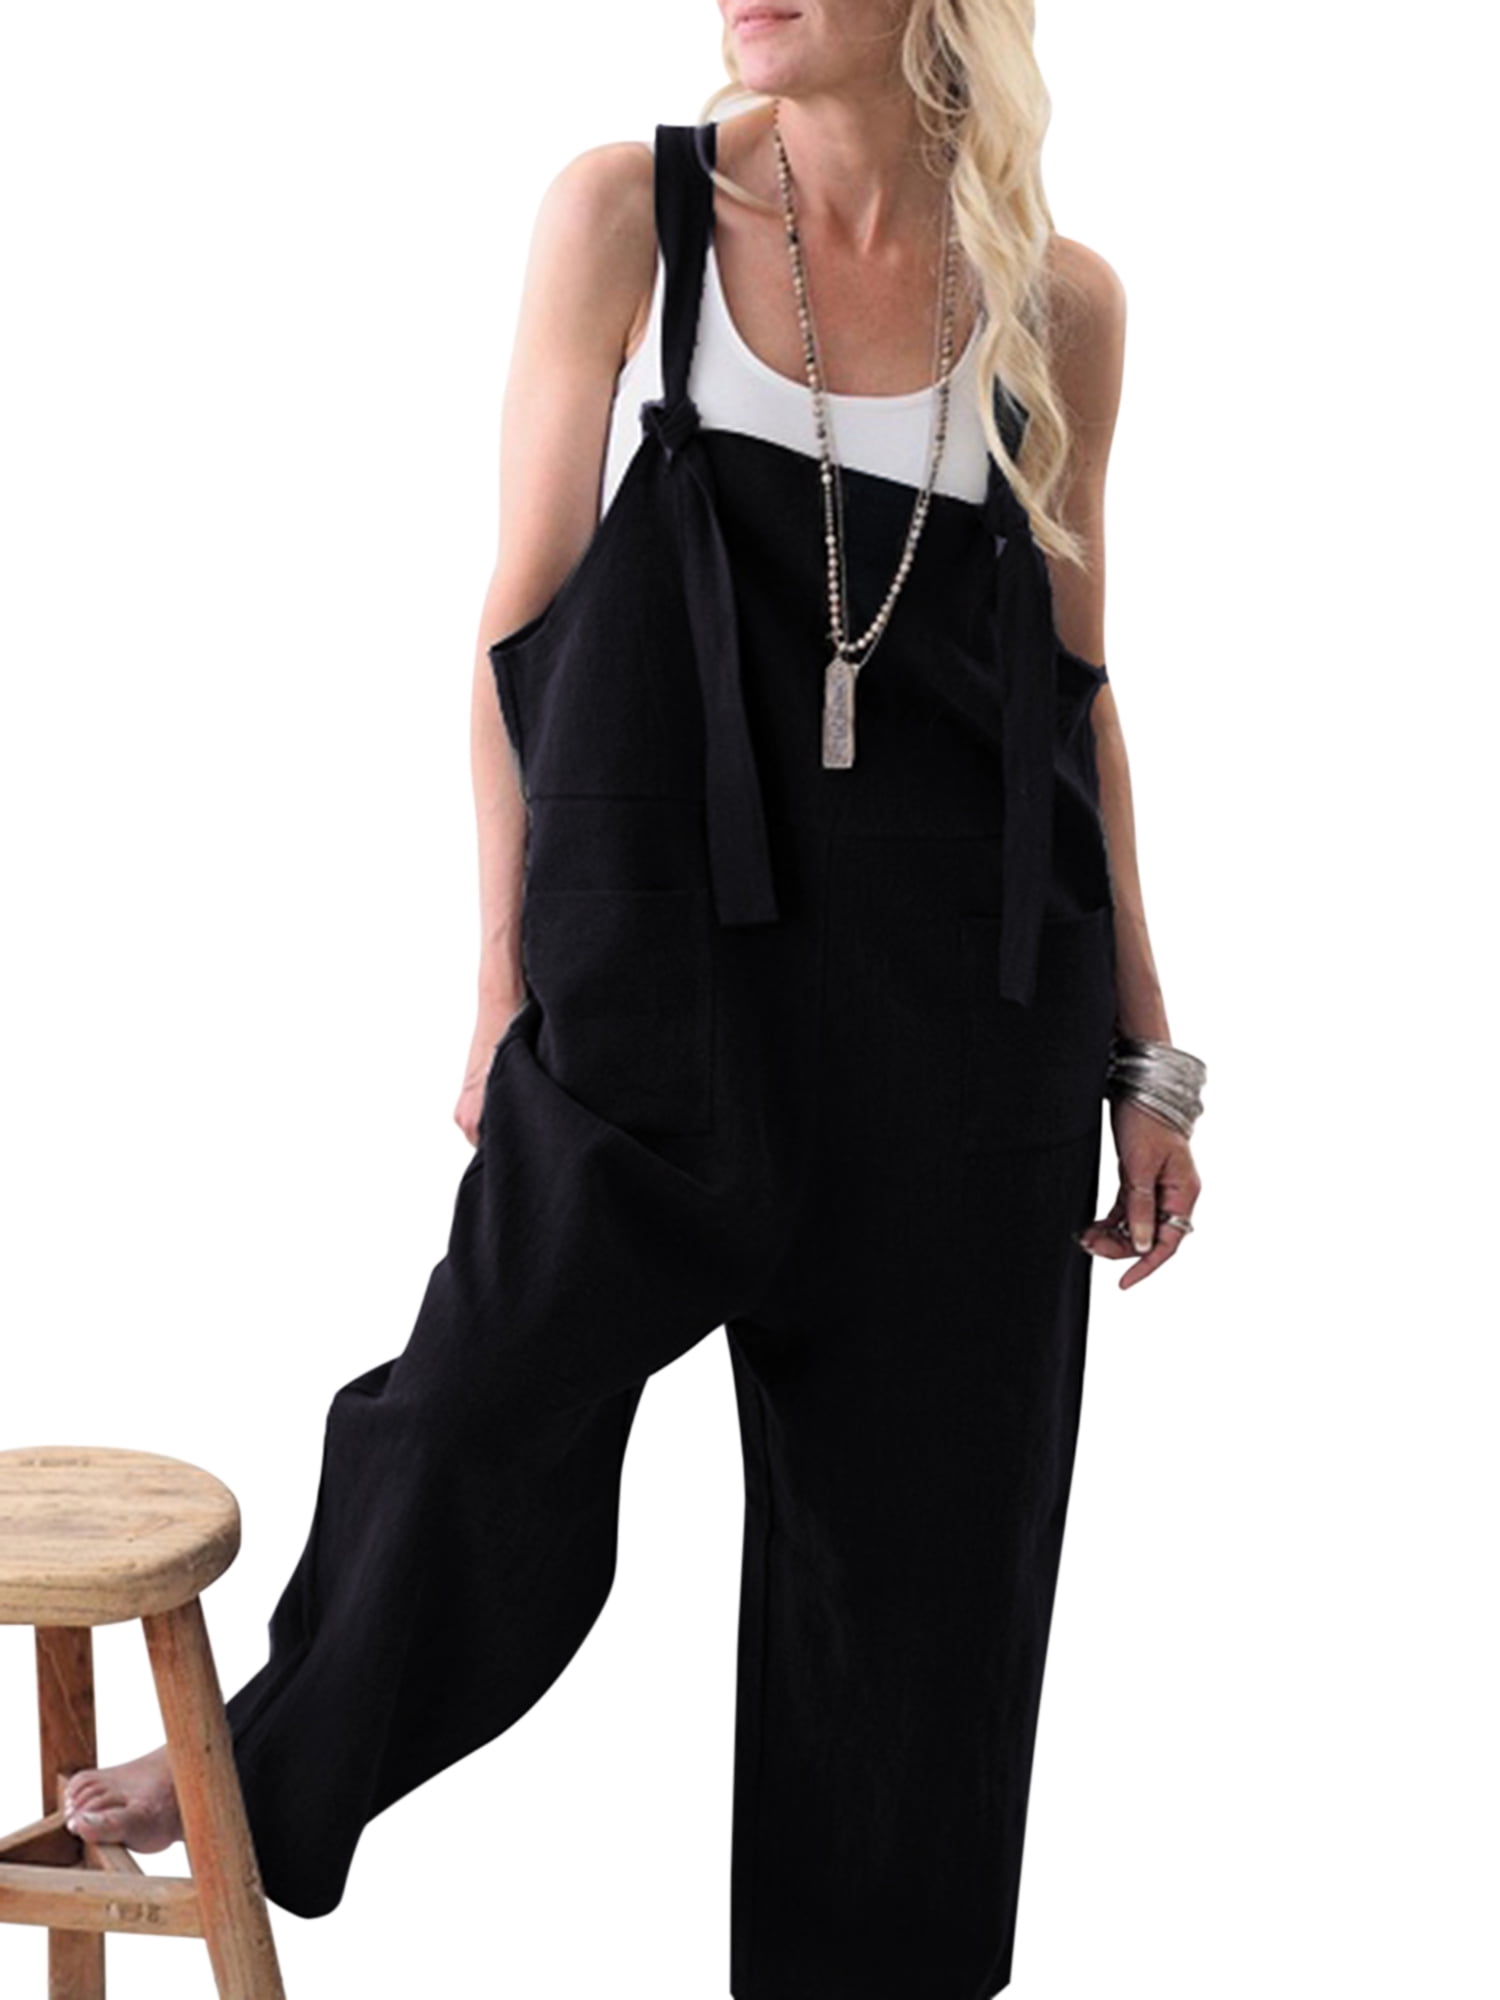 Gocgt Womens Strap Overall Pockets Bib Baggy Playsuit Pants Jumpsuits Trouser 